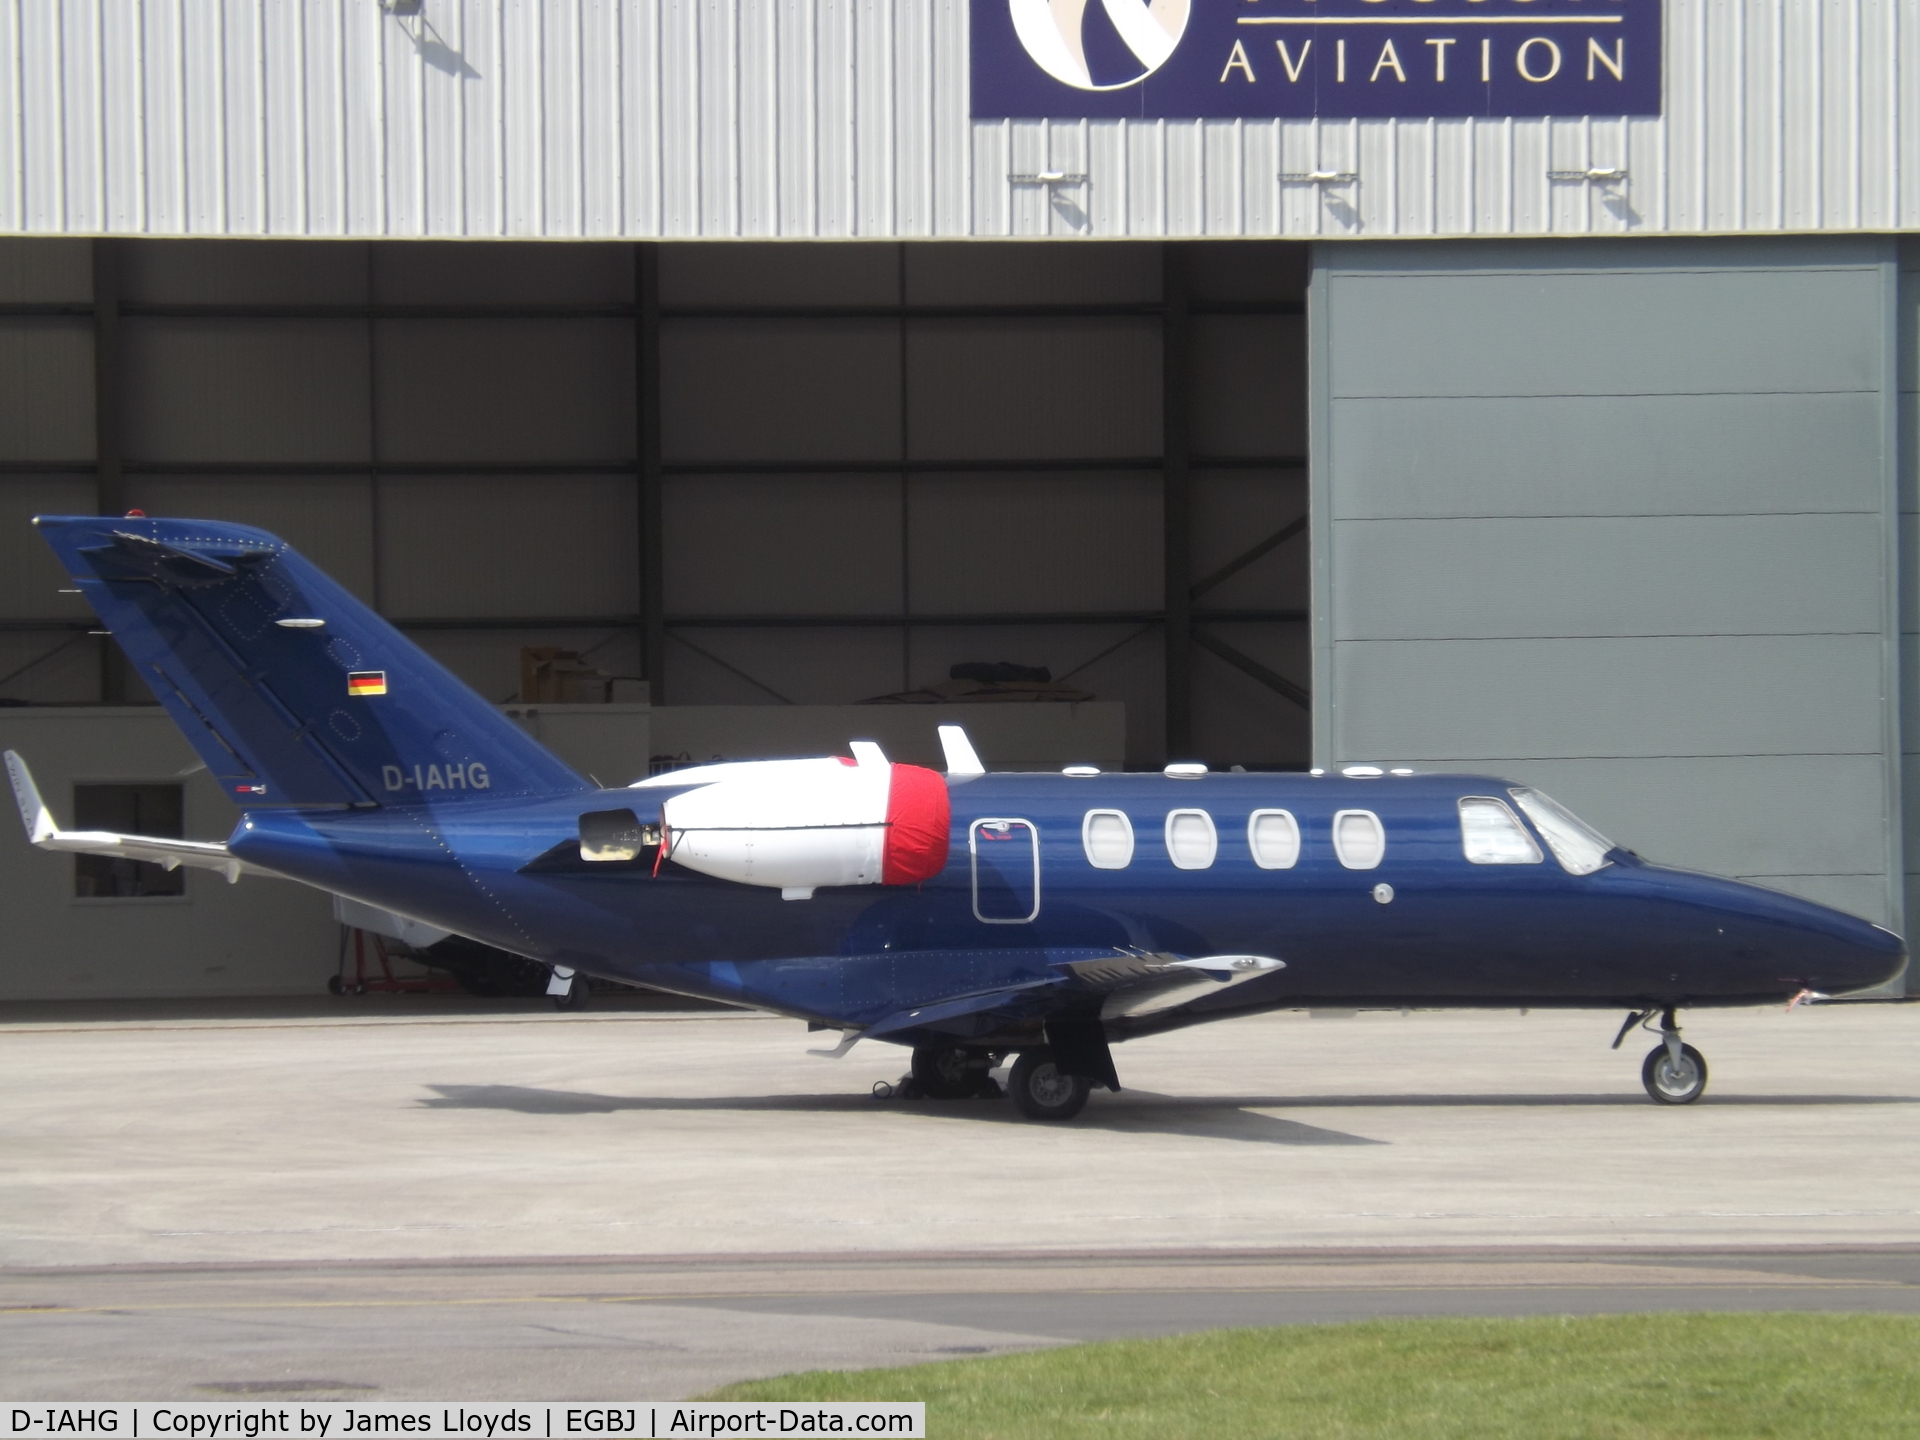 D-IAHG, 1996 Cessna 525 CitationJet CJ1 C/N 525-0126, Seen with a new paint Job at Gloucestershire Airport.